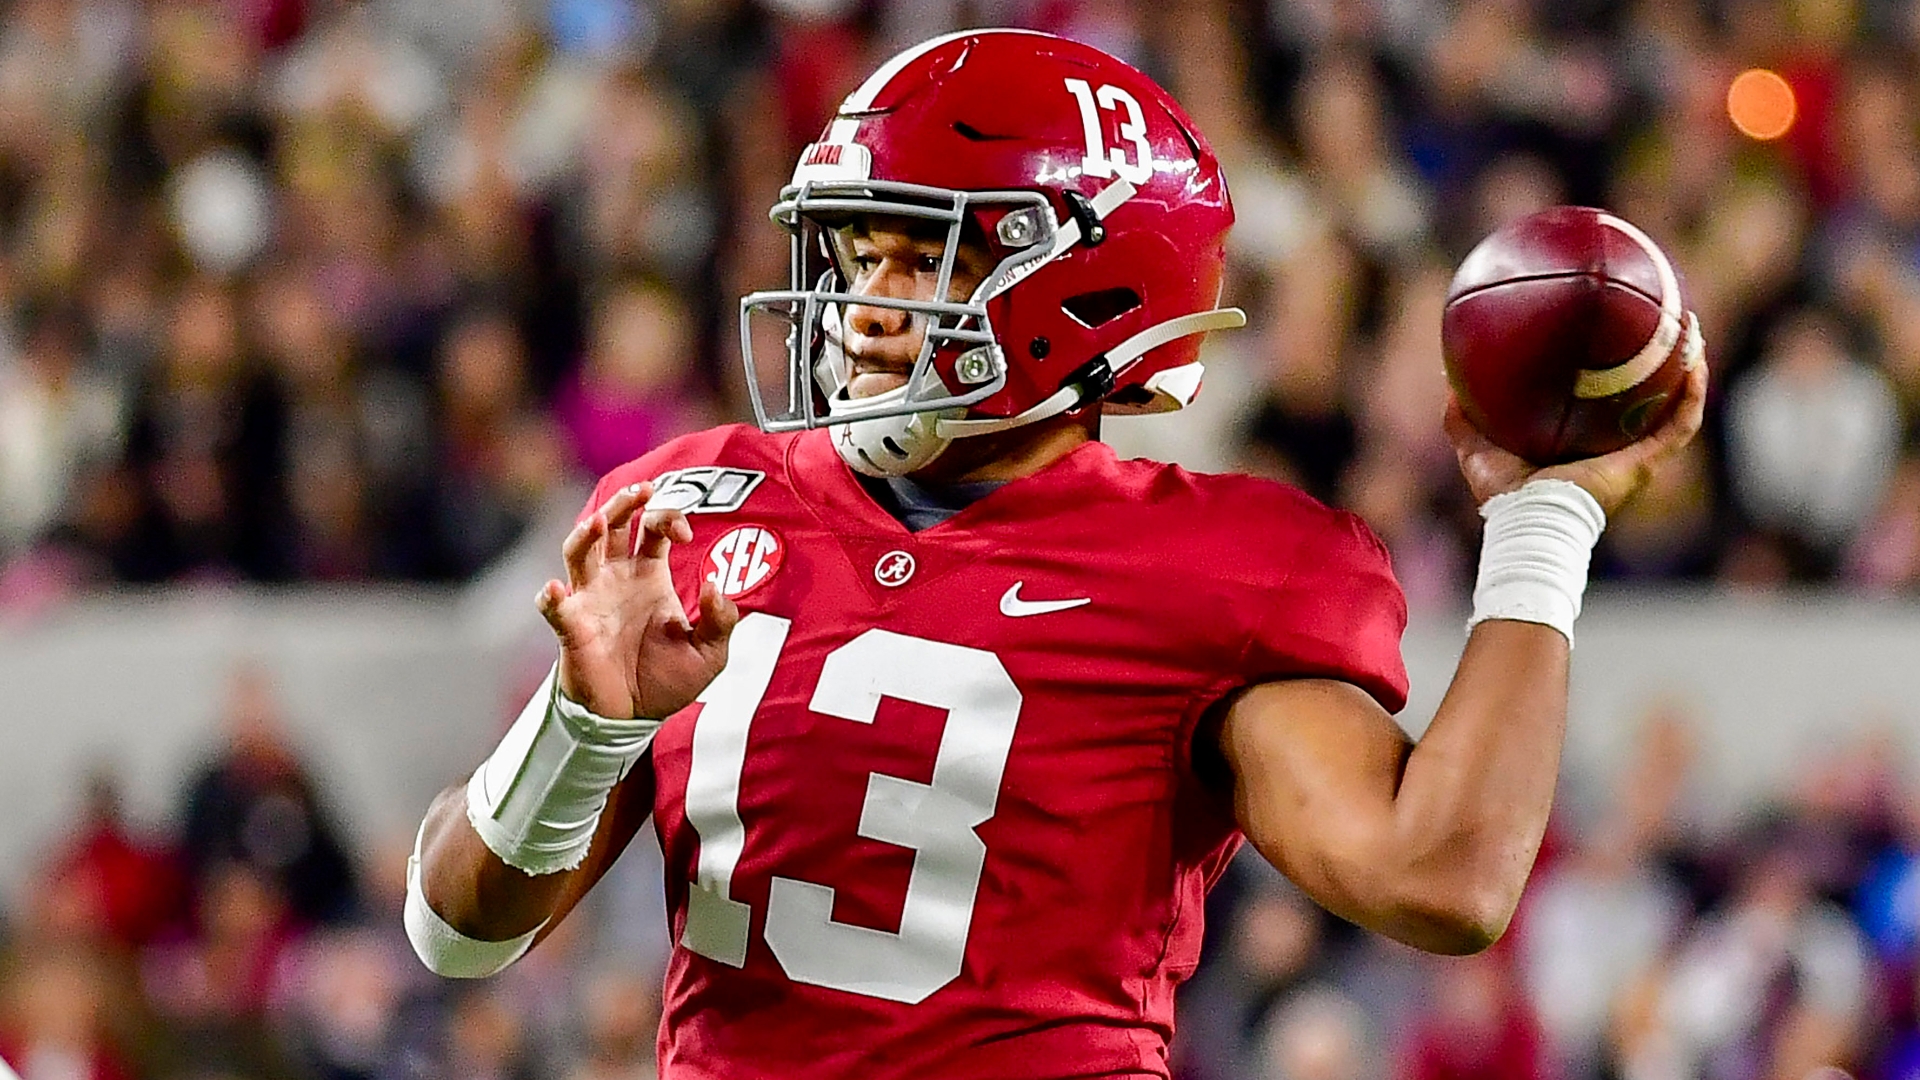 Should the Pats consider trading up to draft Tua?